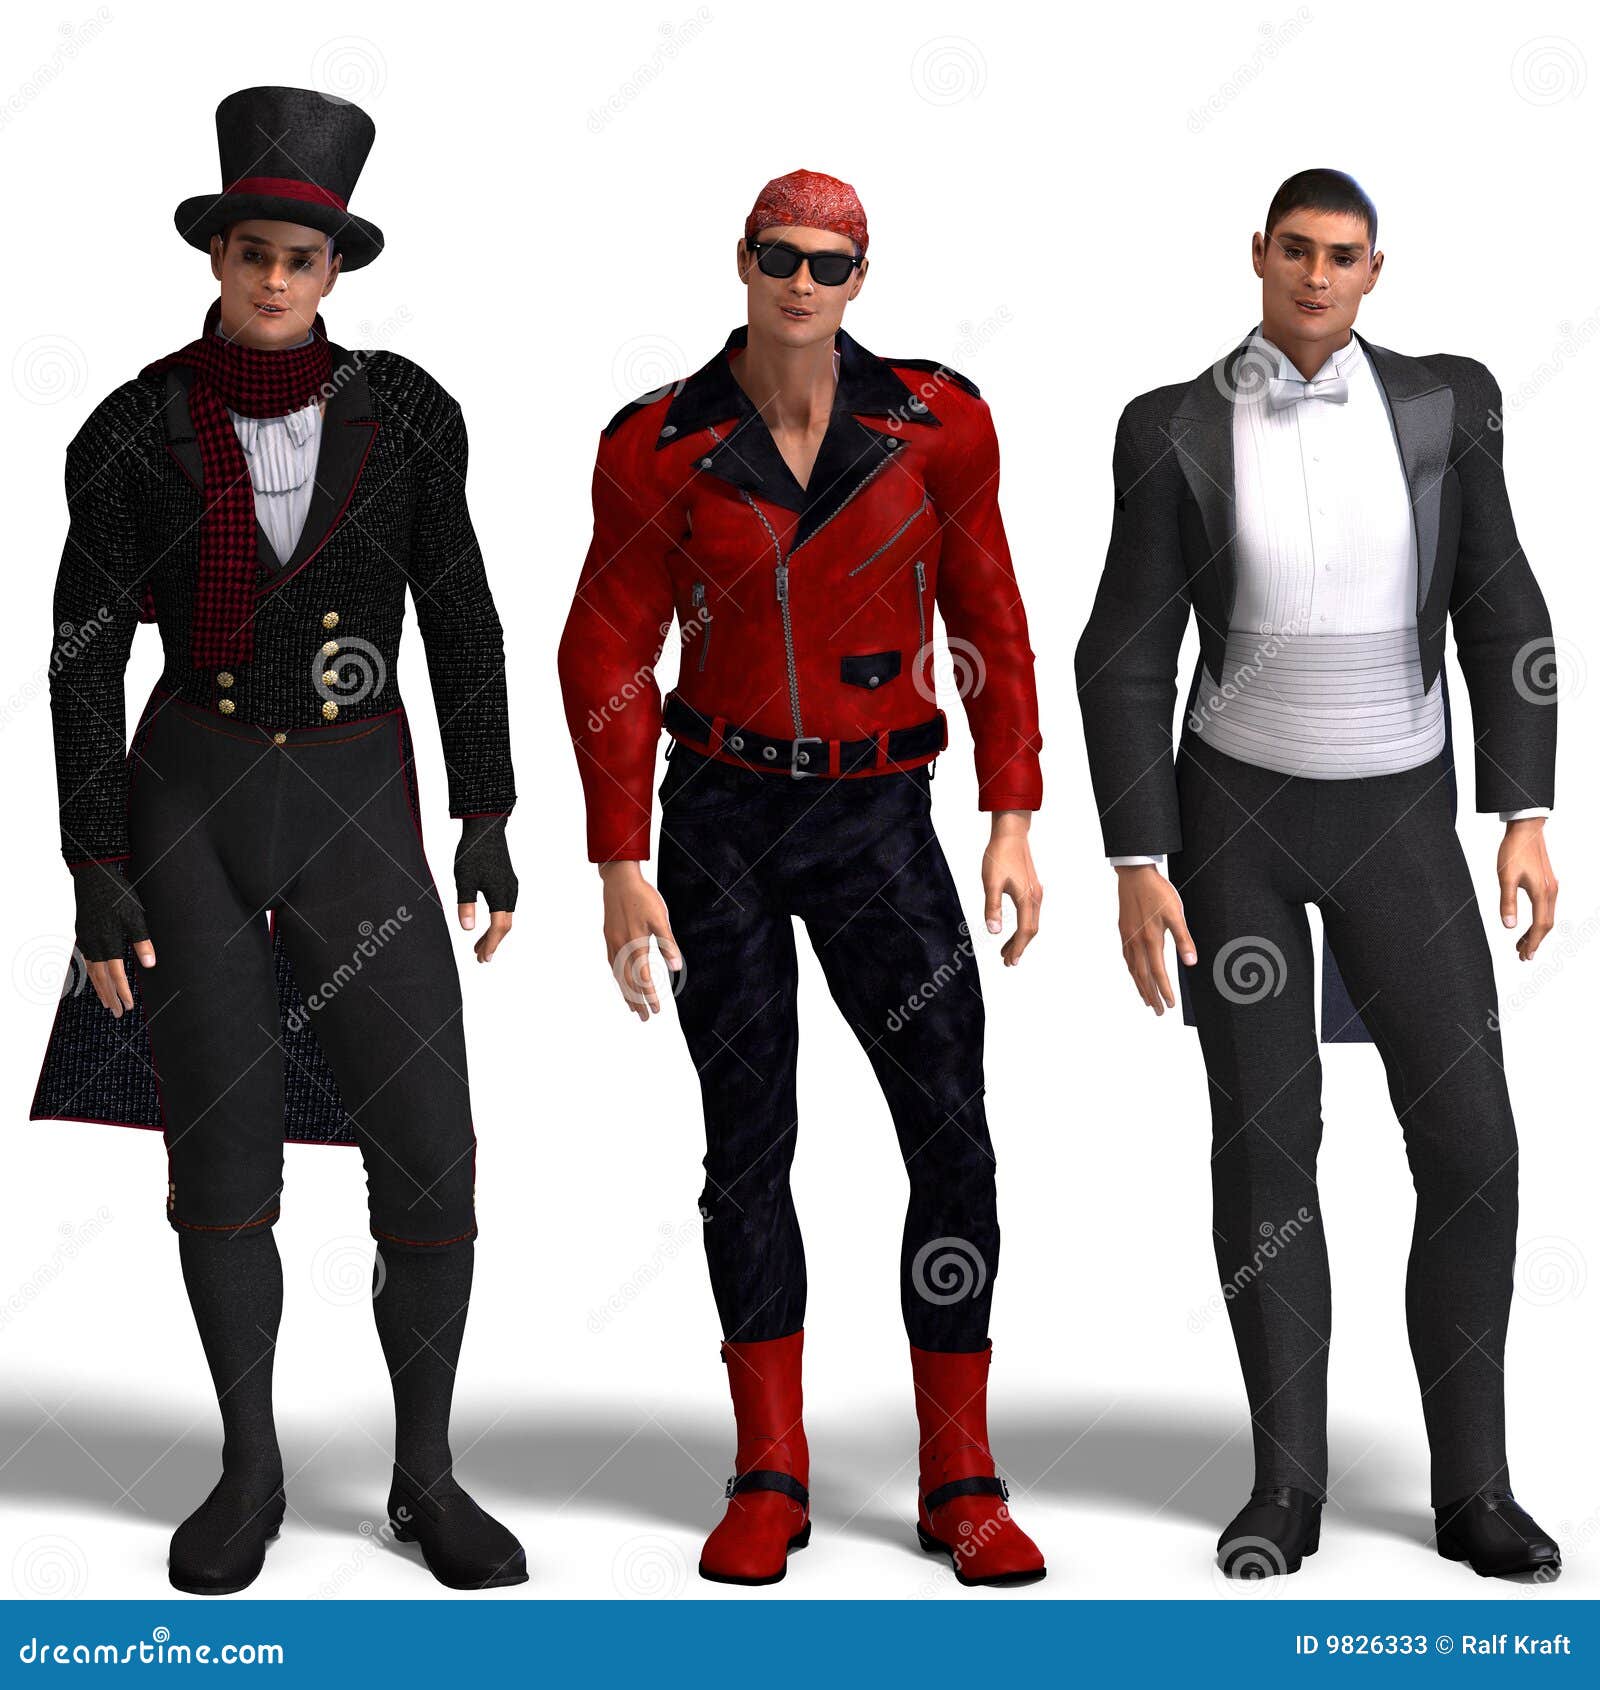 three different outfits: dandy, biker, formal